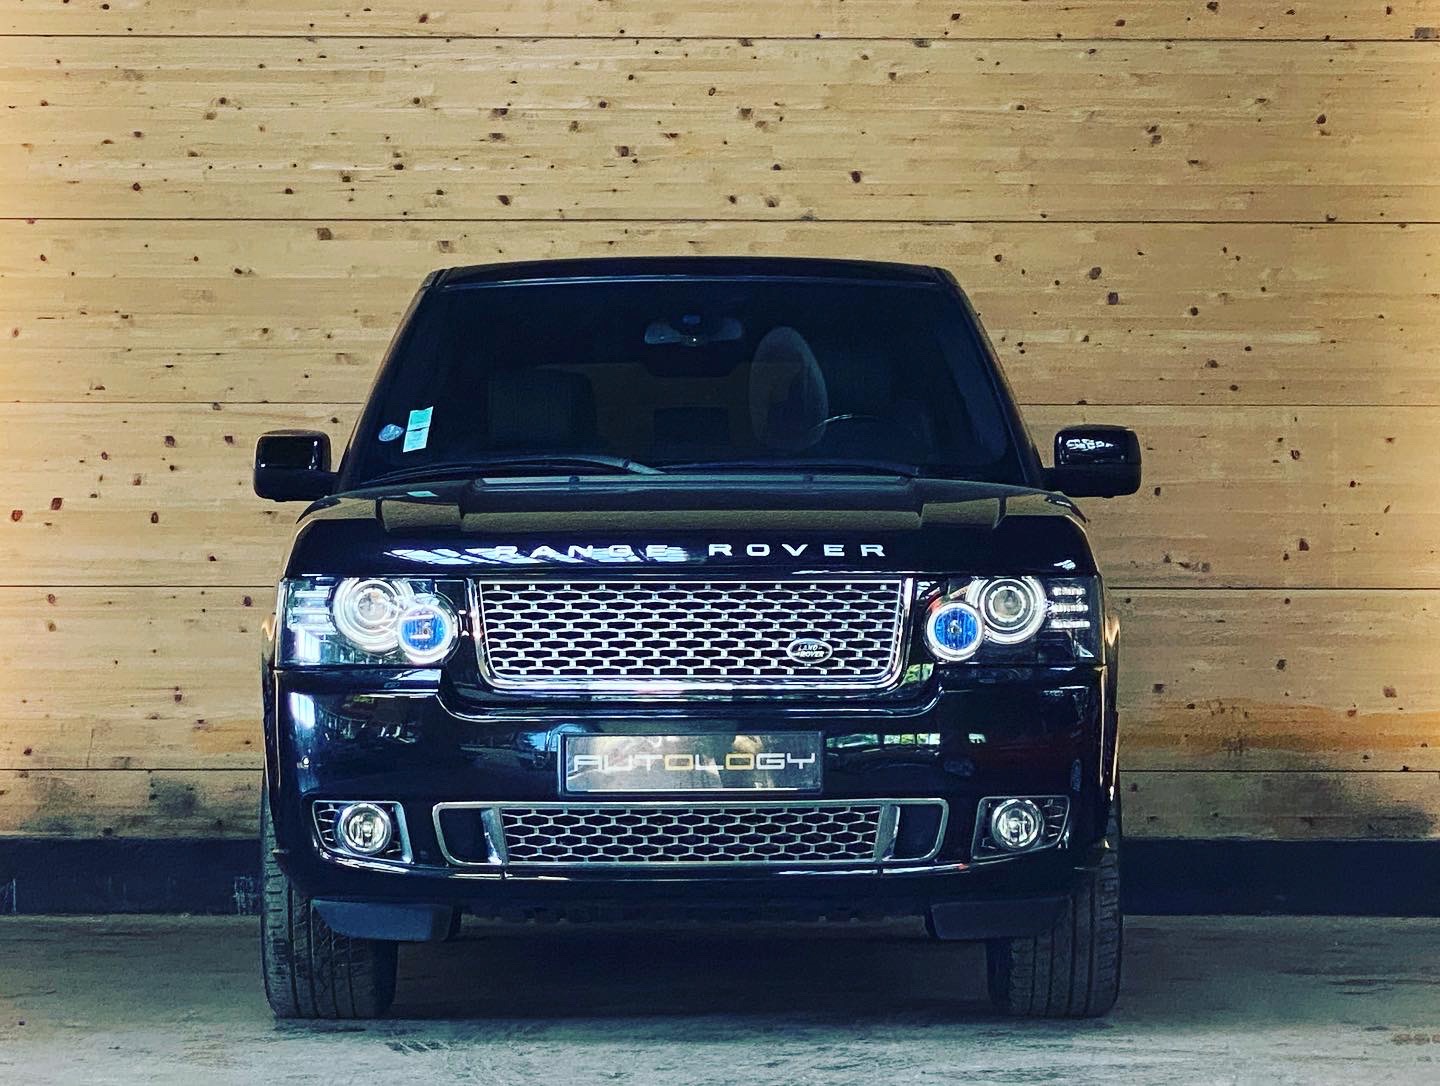 Land Rover Range Rover Supercharged V8 5.0 Autobiography